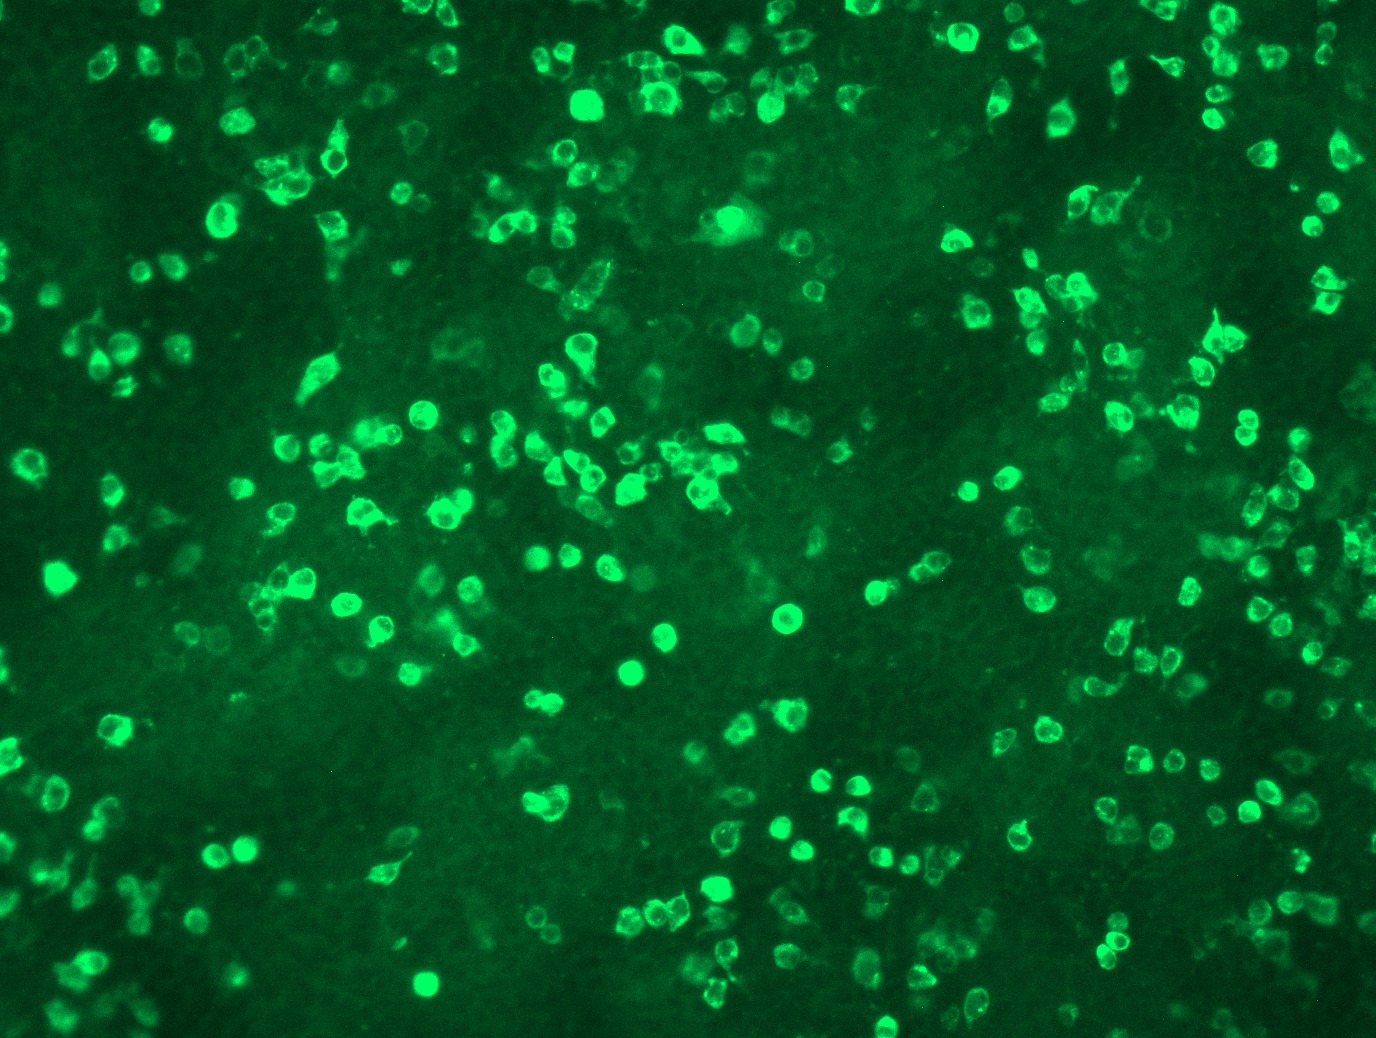 RC215535L3 was used to prepare Lentiviral particles using TR30037 packaging kit. HEK293T cells were transduced with RC215535L3V particle to overexpress human UNK-Myc-DDK fusion protein.